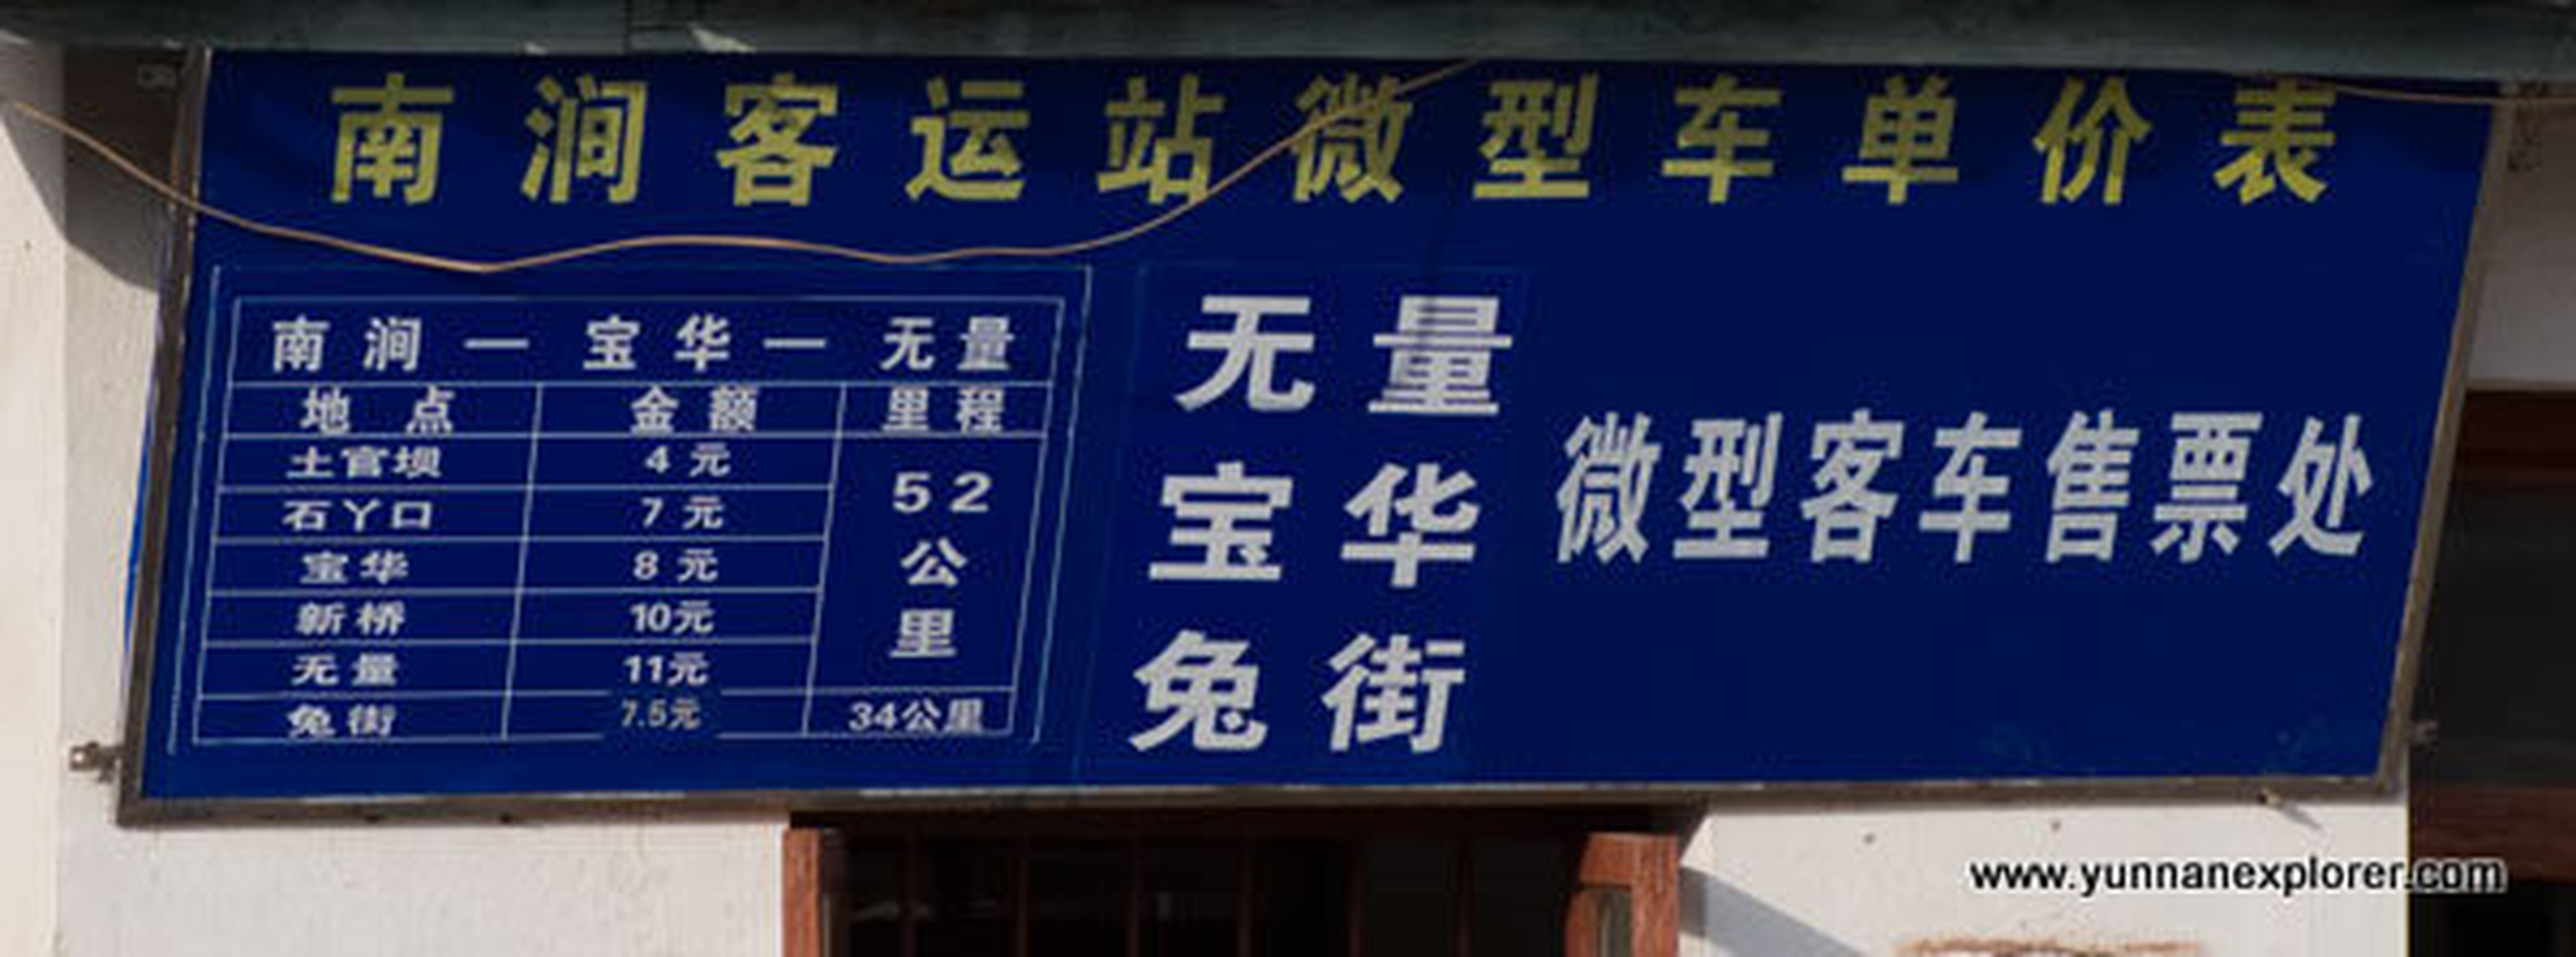 Picture: Nanjian's old terminal in the centre of town has good connections. 